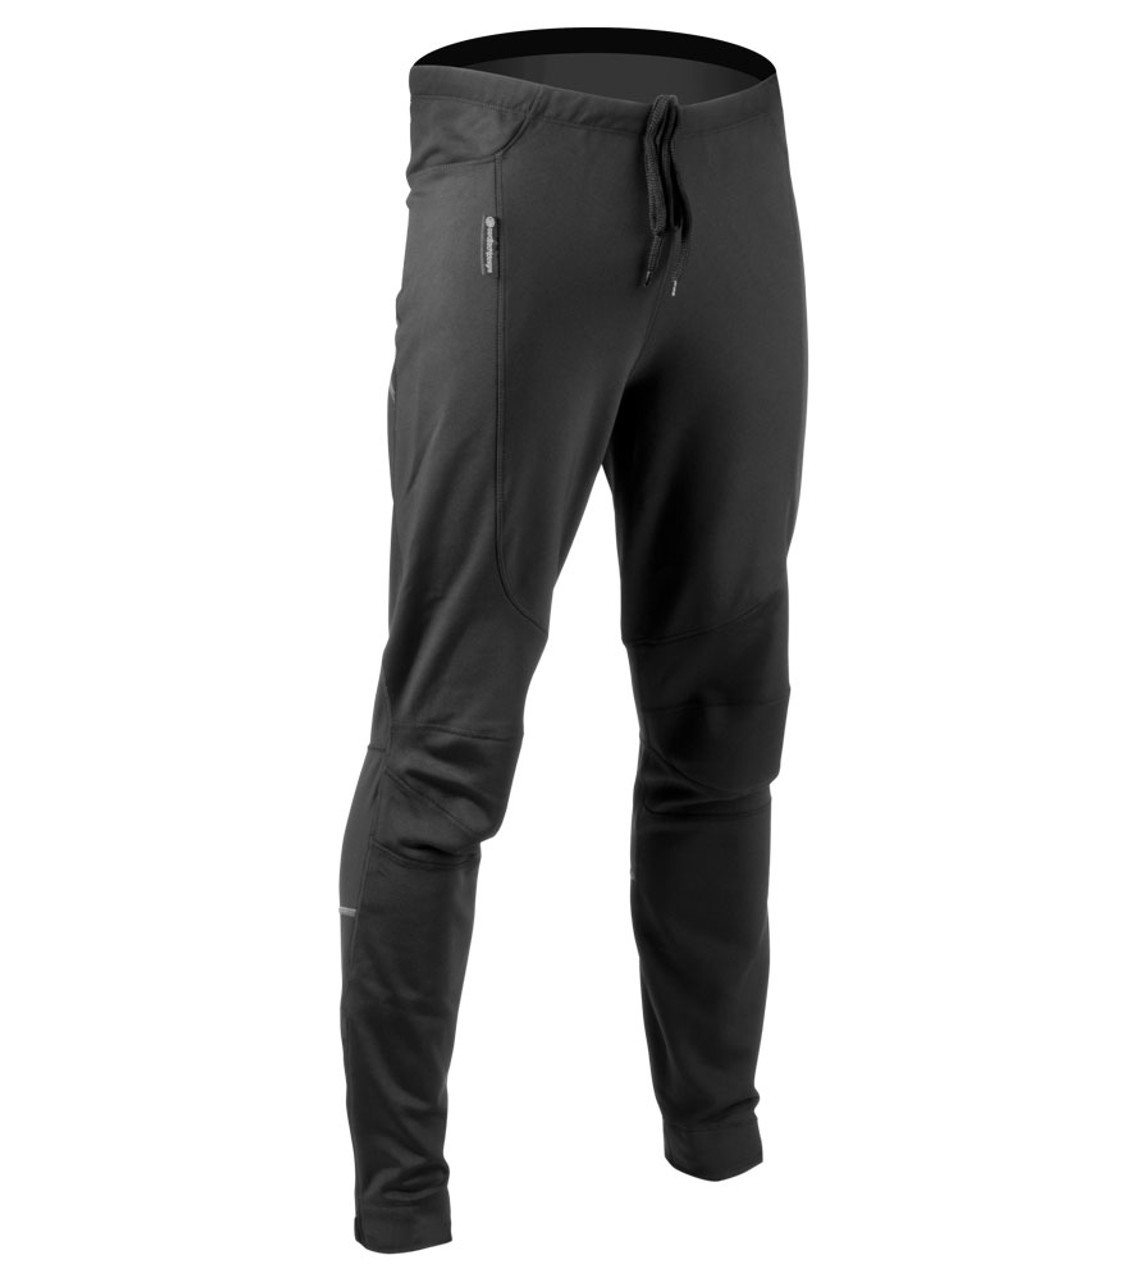 Souke Sports Men's Winter Cycling Pants Windproof Thermal